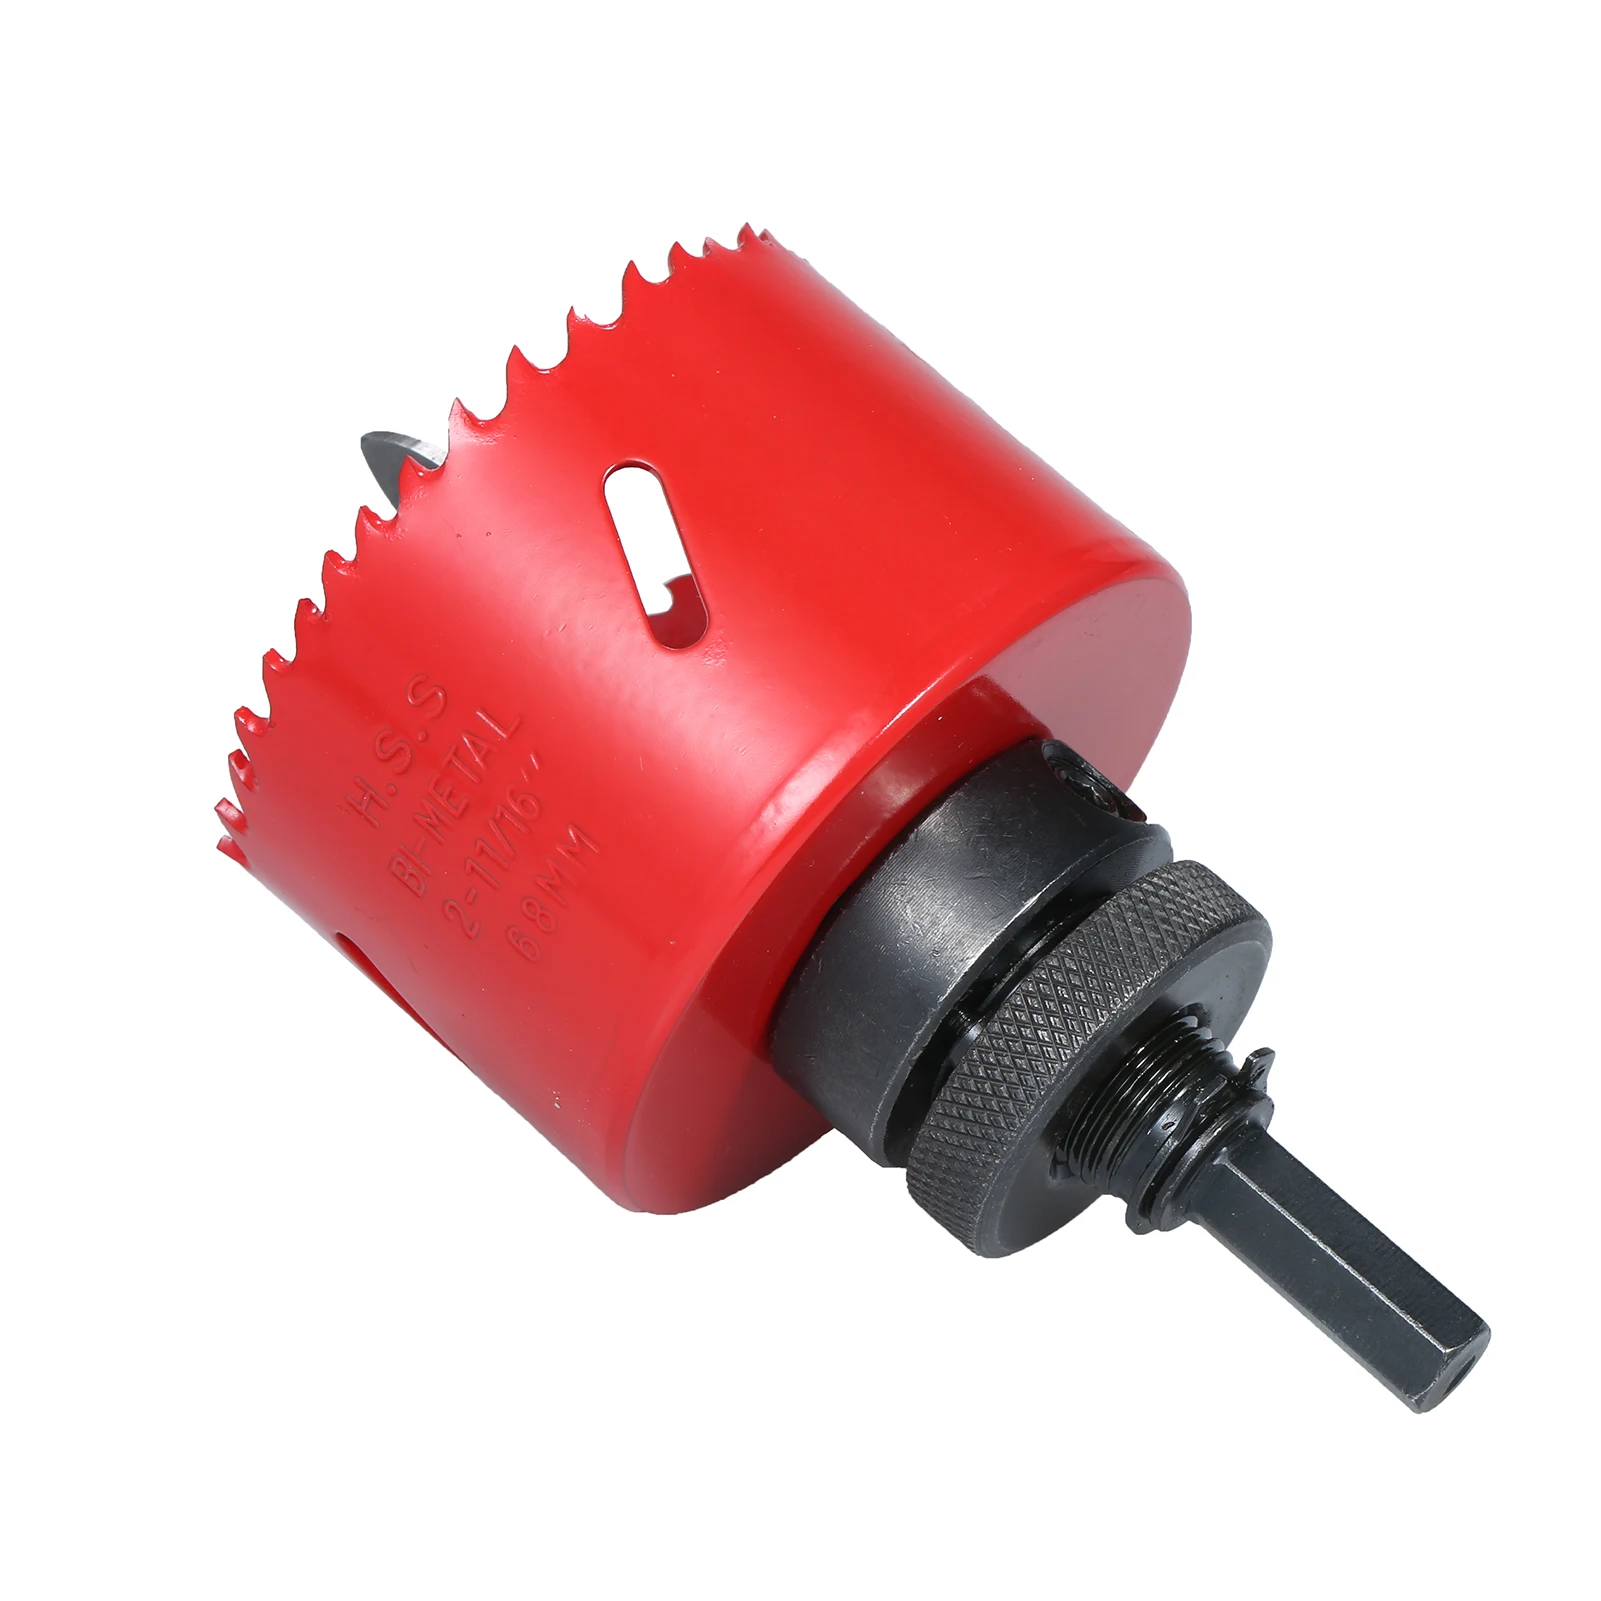 68mm Bi-Metal and Hole Saw Set for Tiles Marble Glass Ceramic Hole Opener Power Tool Accessories HSS Steel Drill Bit Hole Cutter